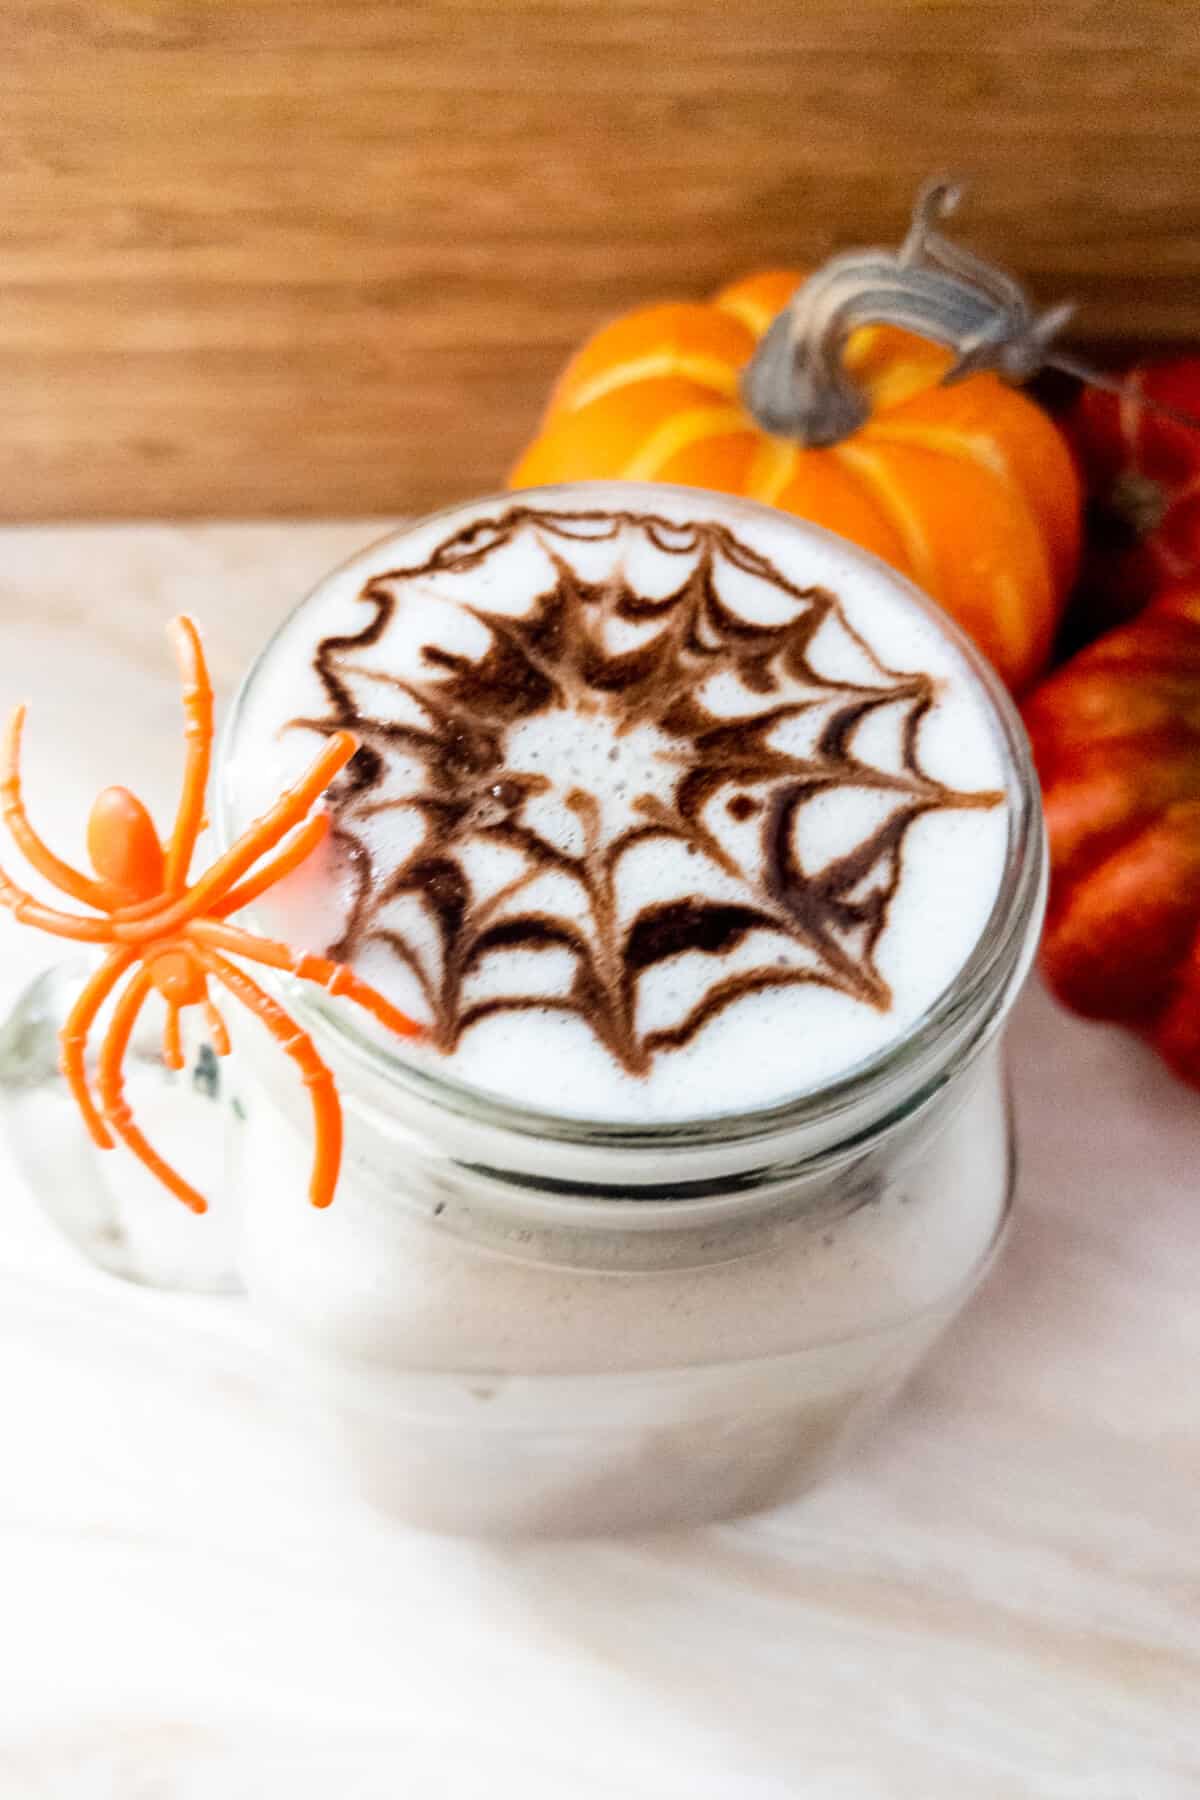 Café mocha topped with chocolate spider web.